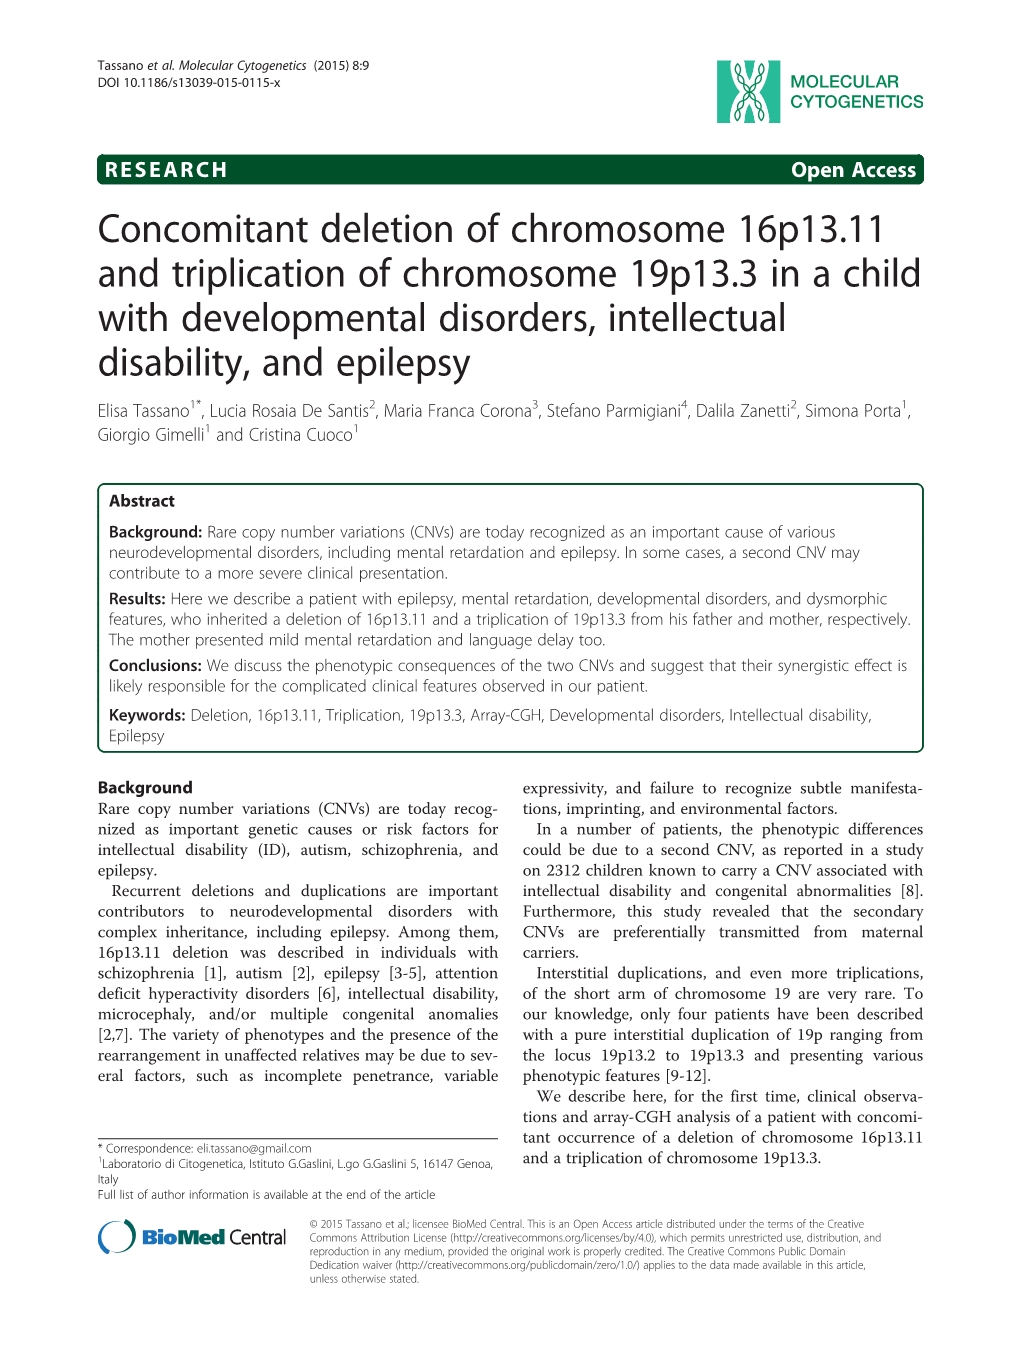 Concomitant Deletion of Chromosome 16P13.11 and Triplication Of